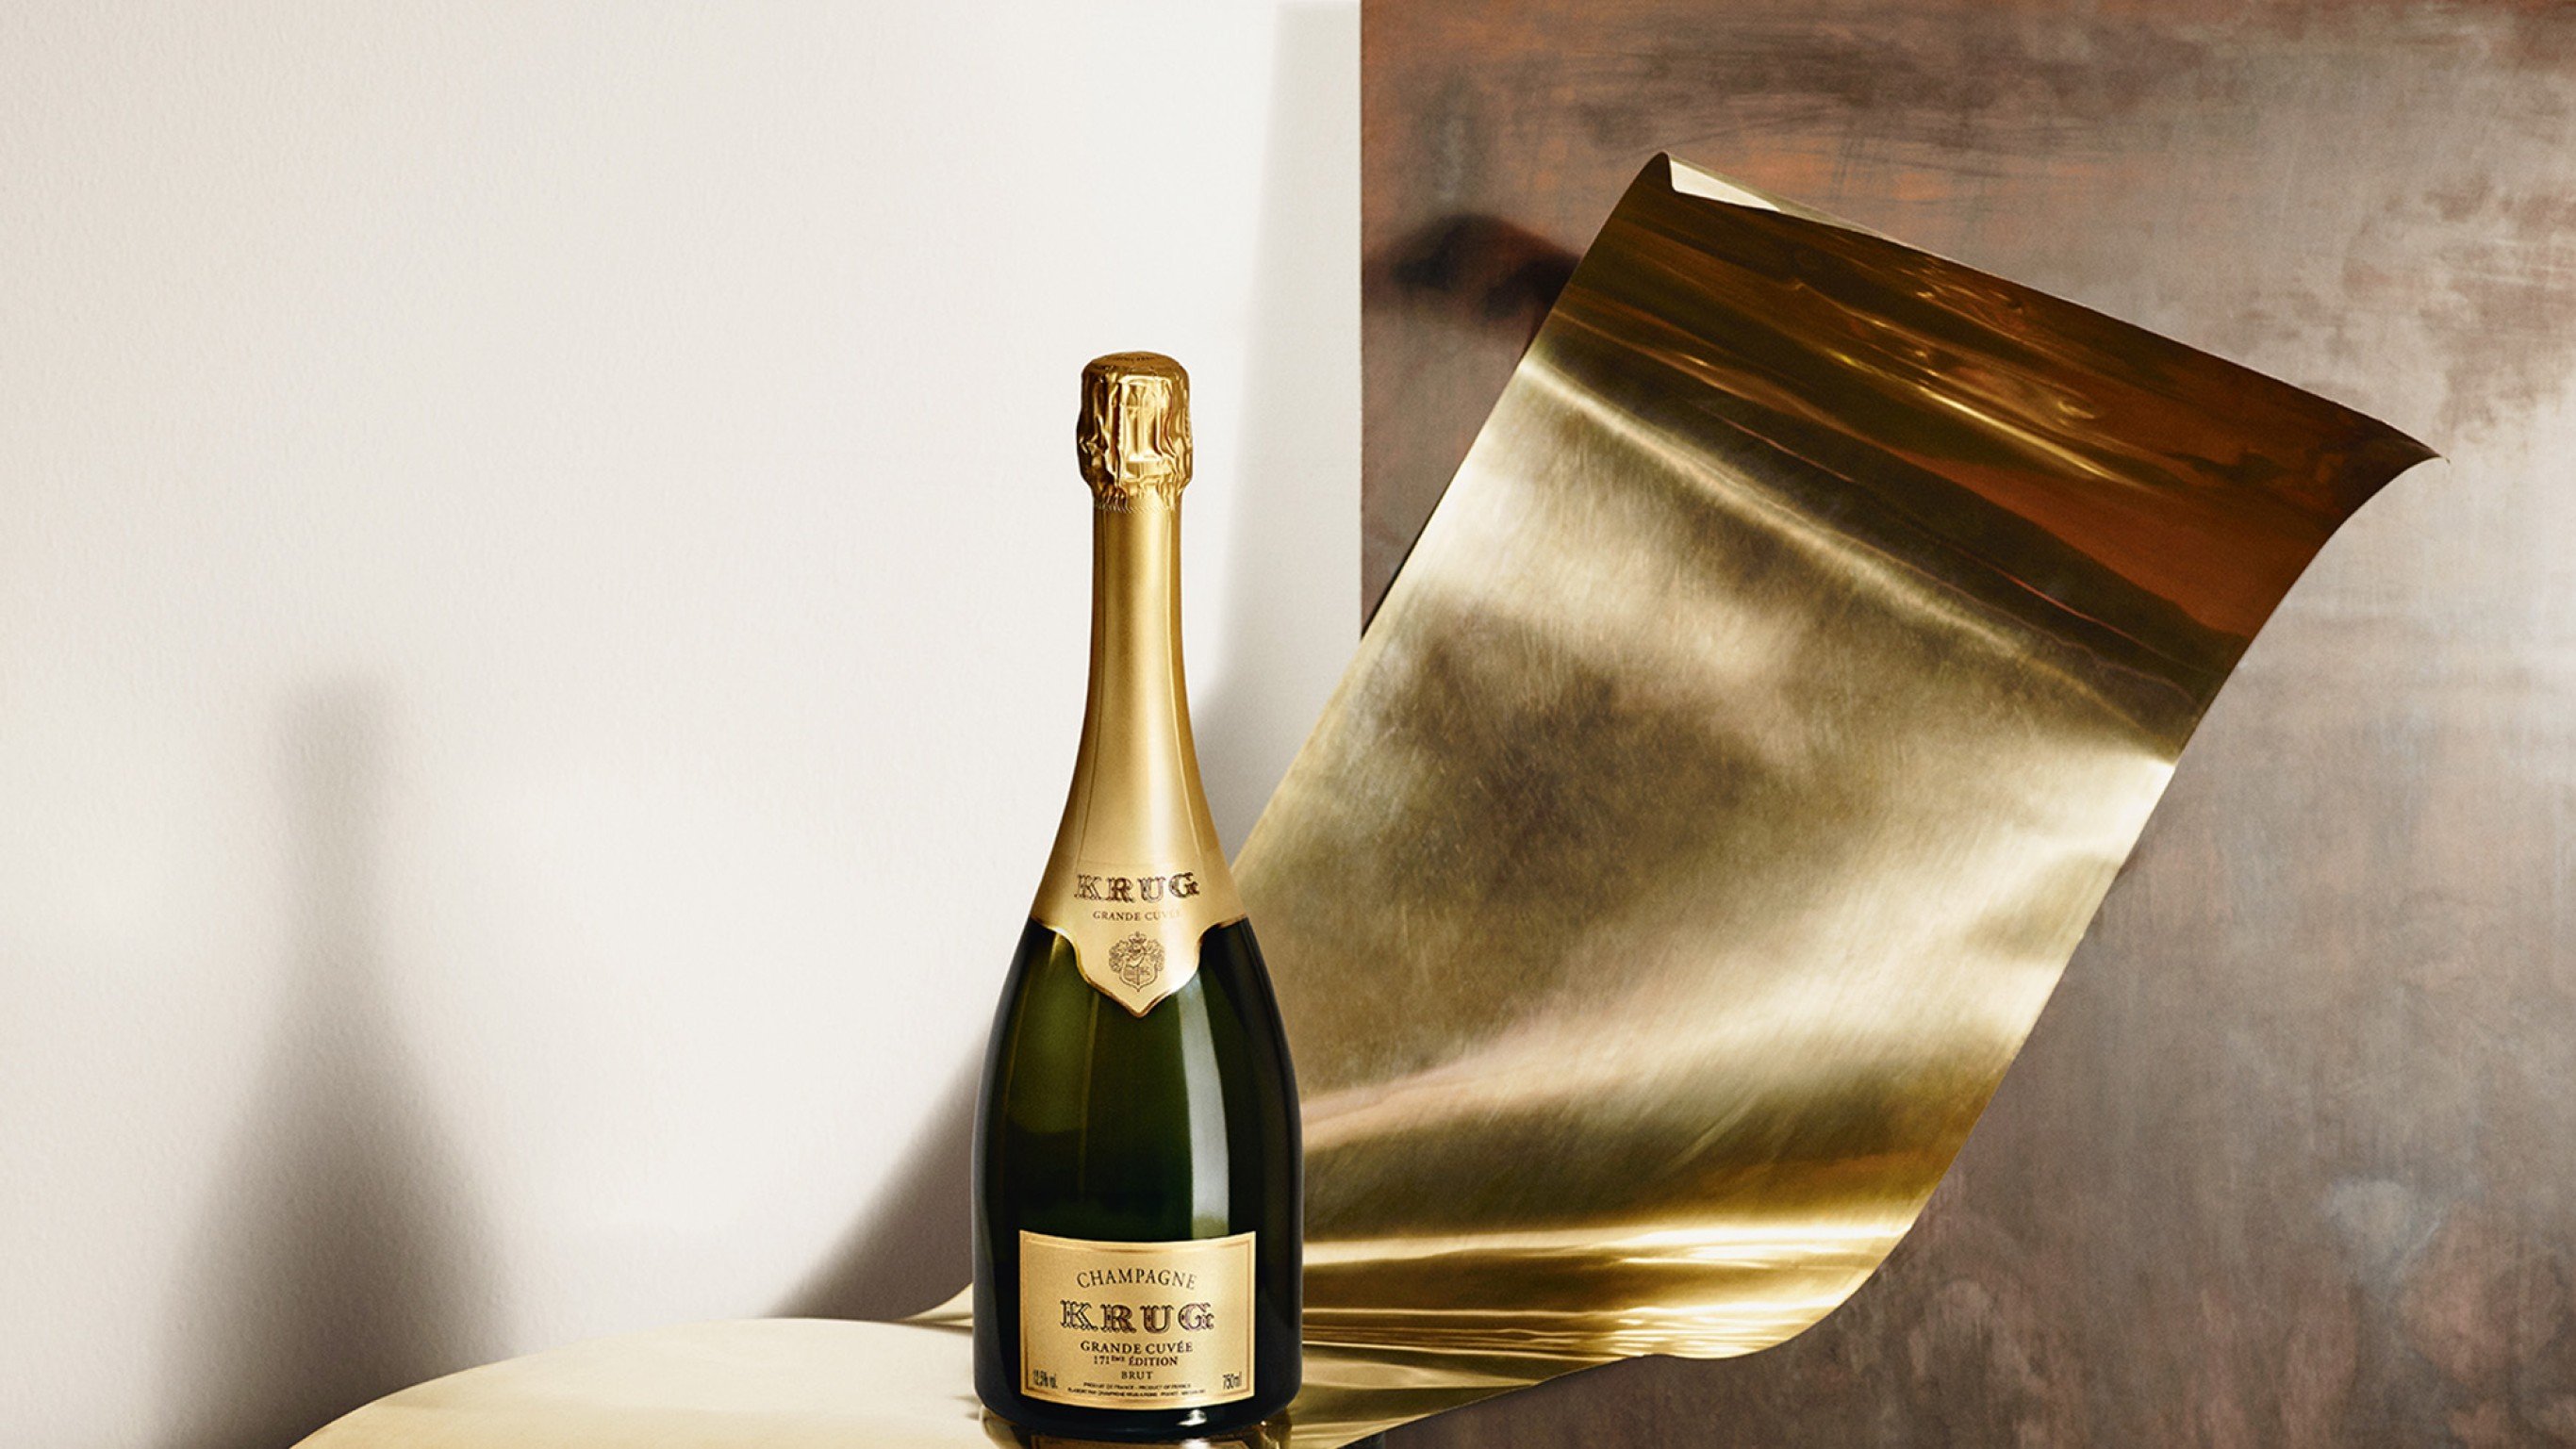 Cuvée Champagne expression Grande Krug - The most of generous